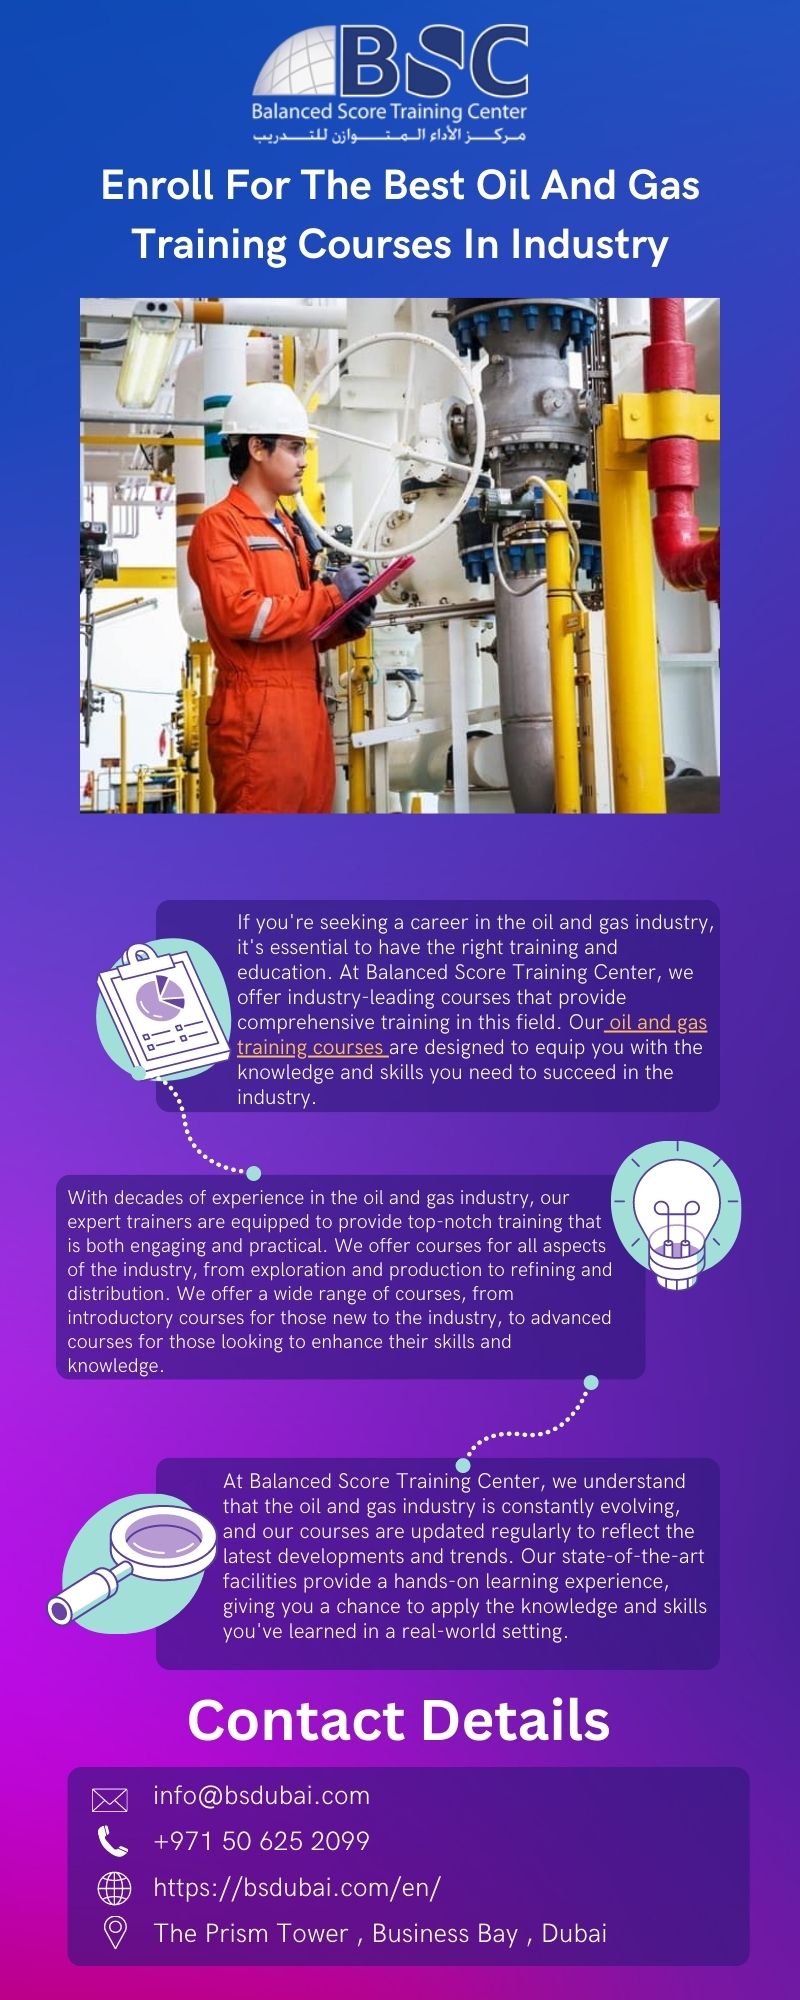 Enroll For The Best Oil And Gas Training Courses In Industry